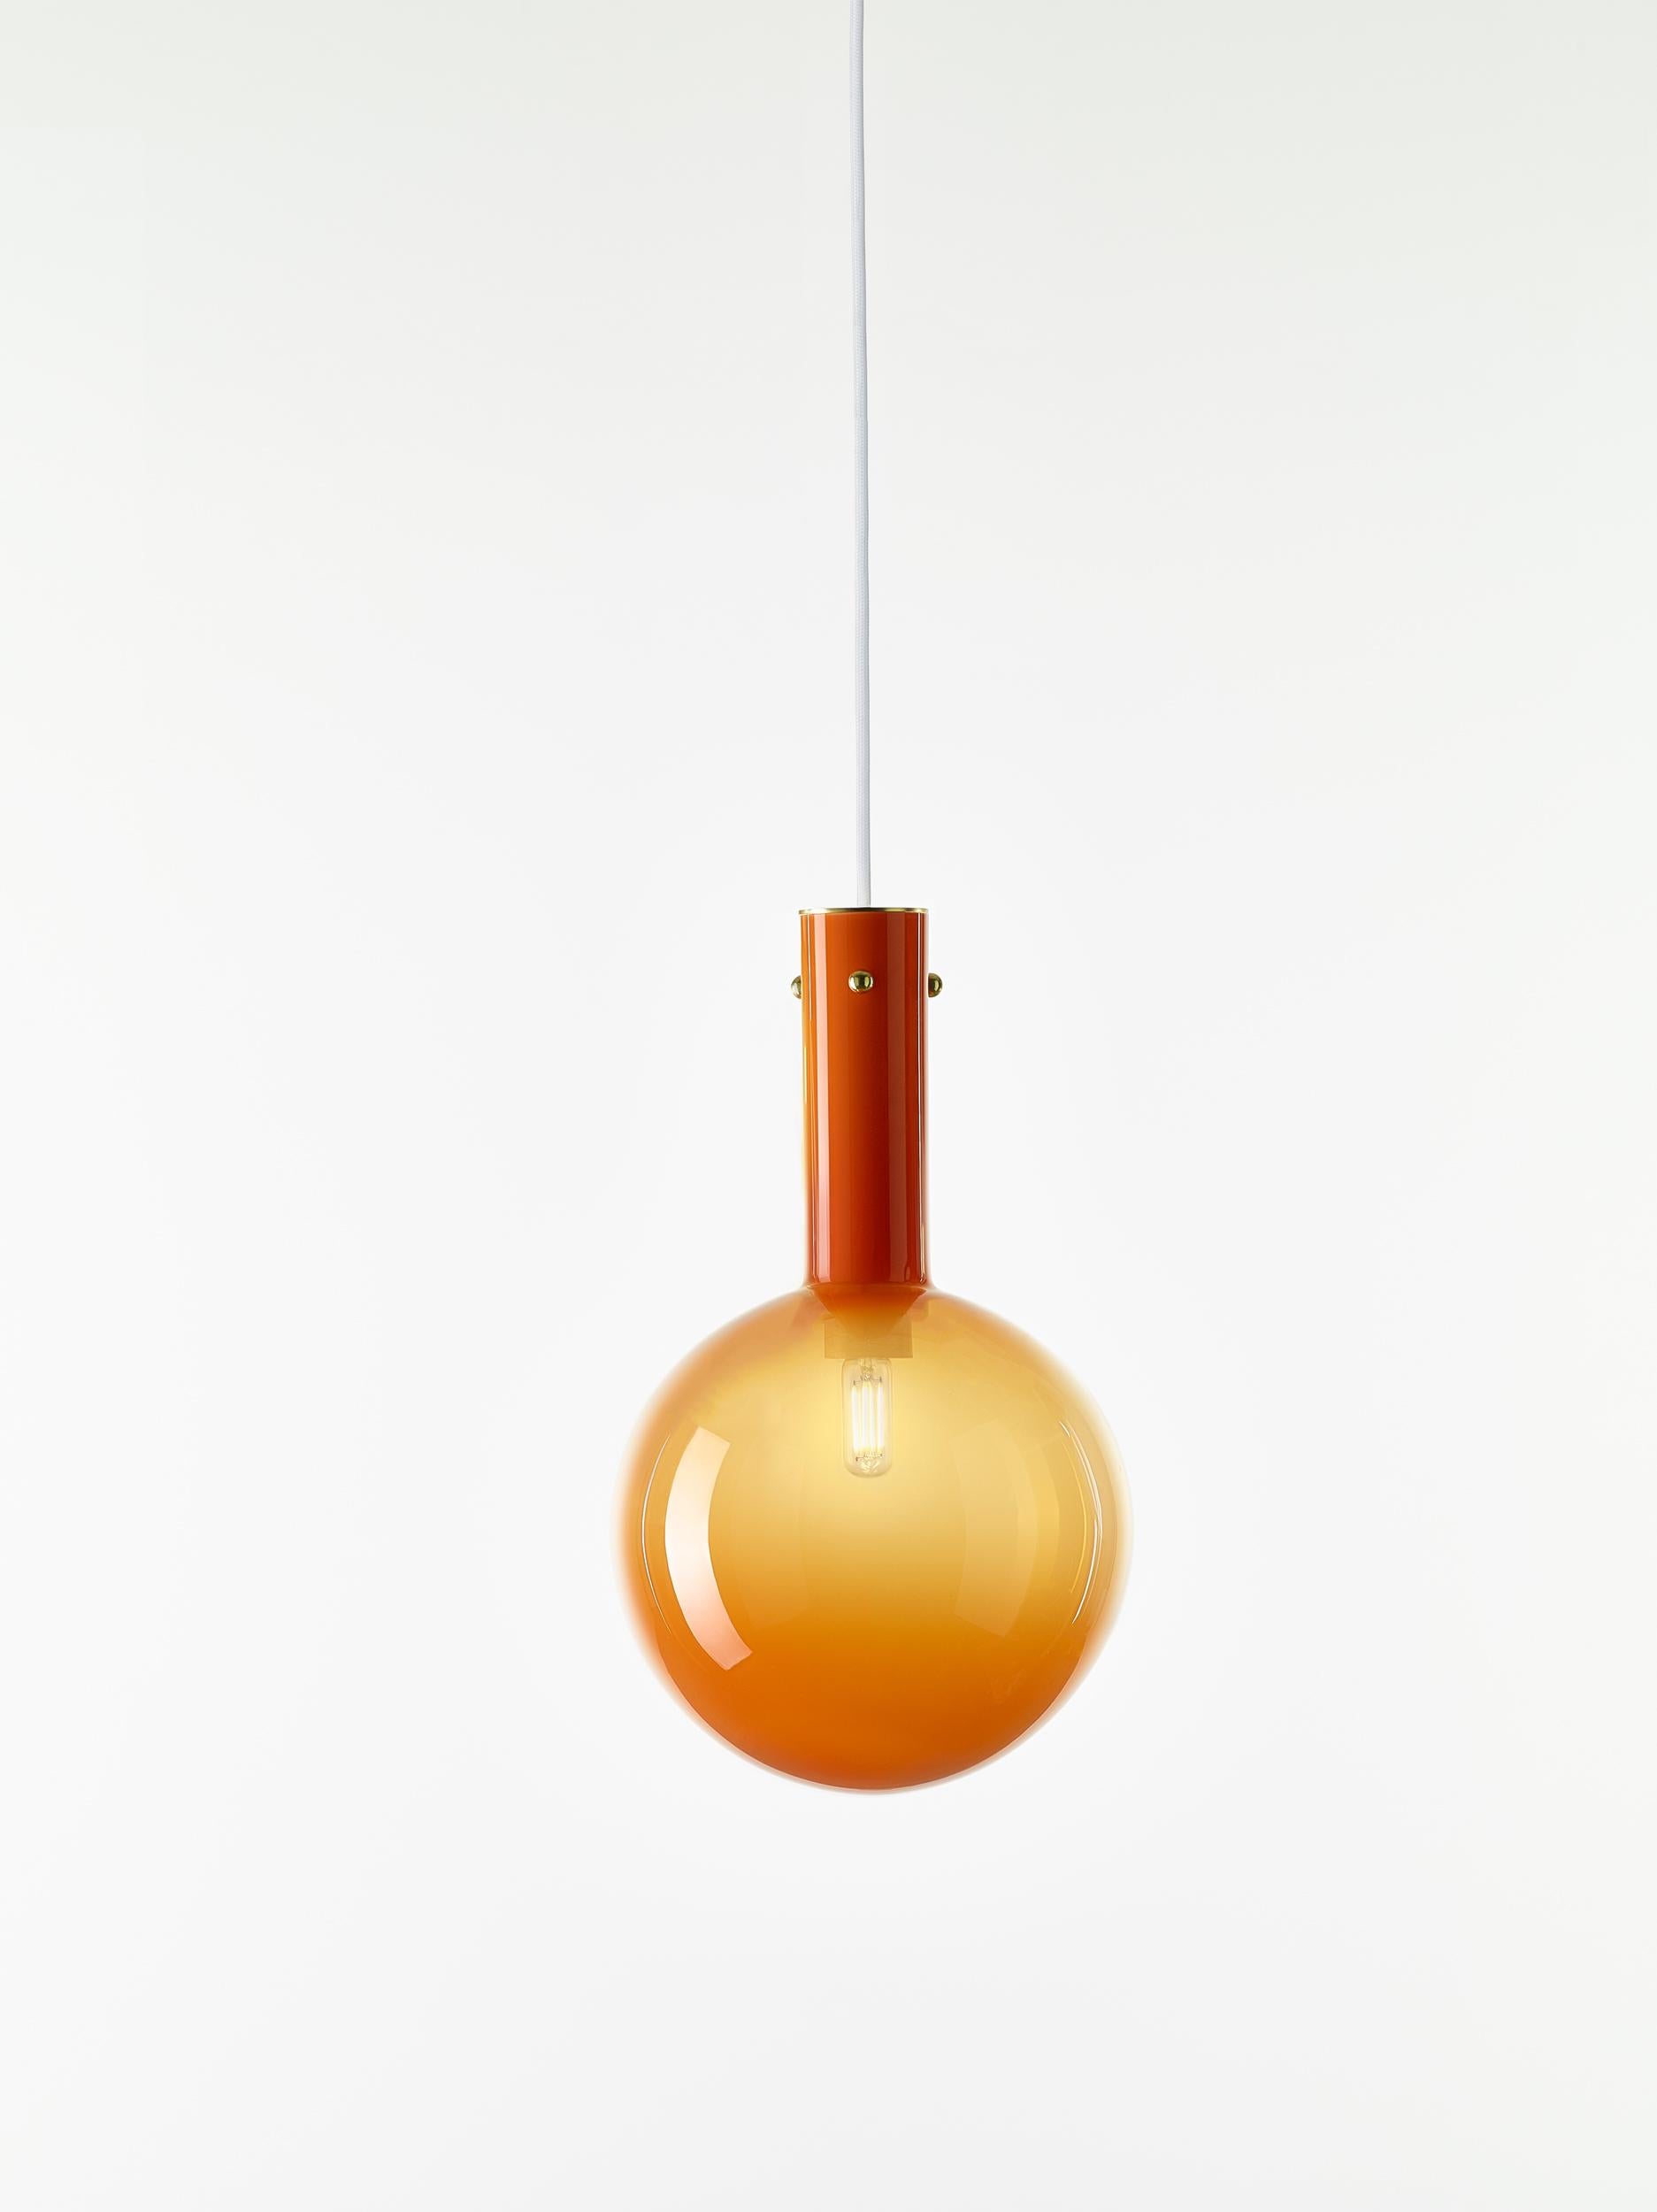 Orange Sphaerae pendant light by Dechem Studio
Dimensions: D 20 x H 180 cm
Materials: brass, metal, glass.
Also available: different finishes and colors available.

Only one homogenous piece of hand-blown glass creates the main body of Sphaerae